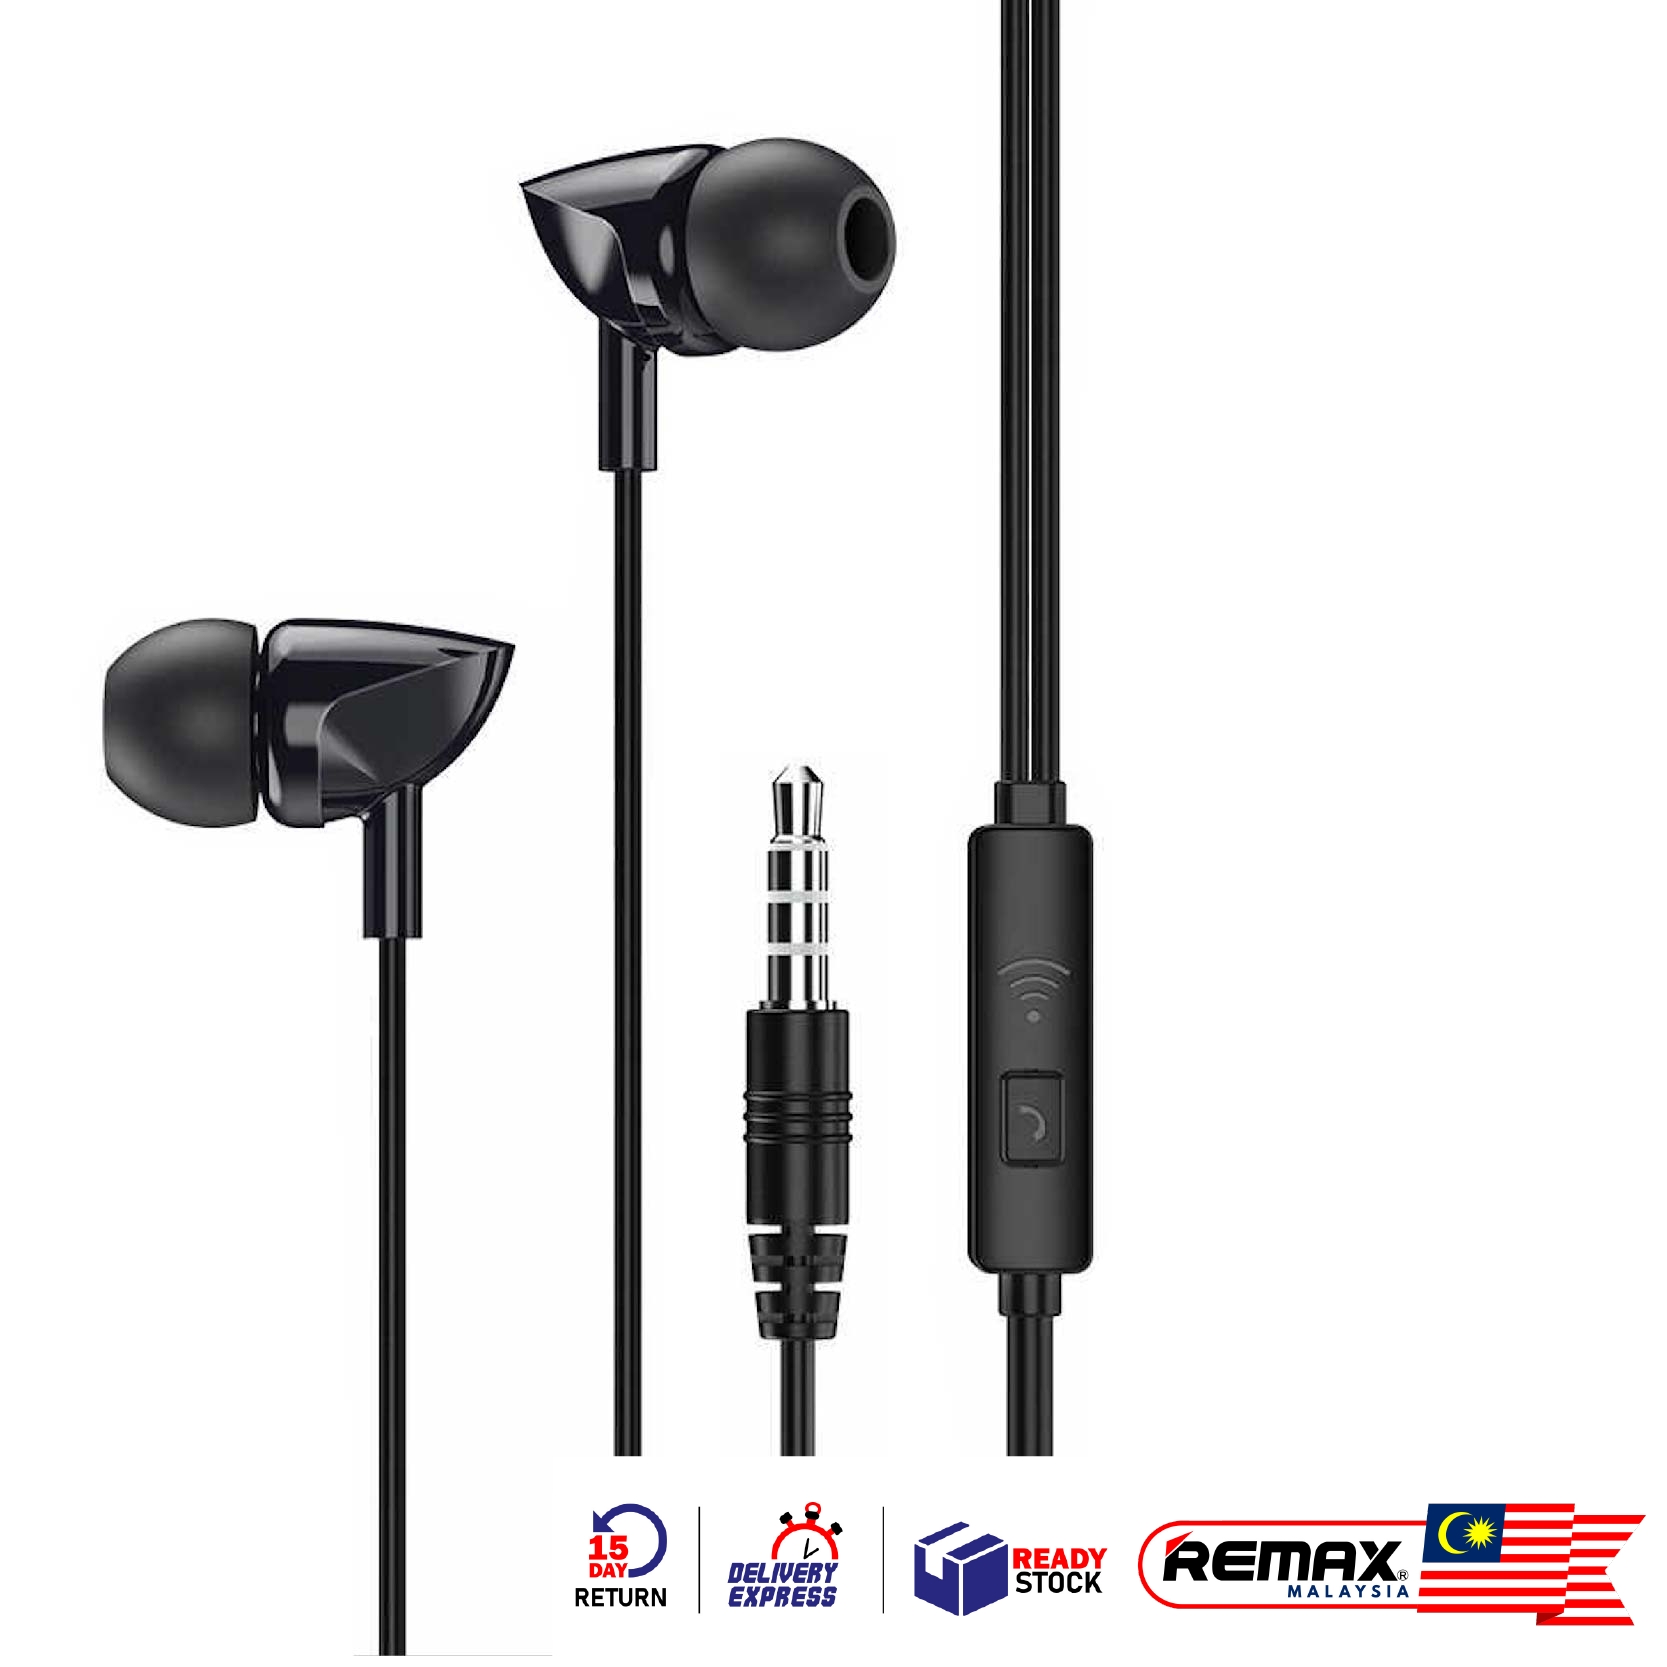 Remax RW-106 3.5mm Aux Wired Earphone For Call & Music